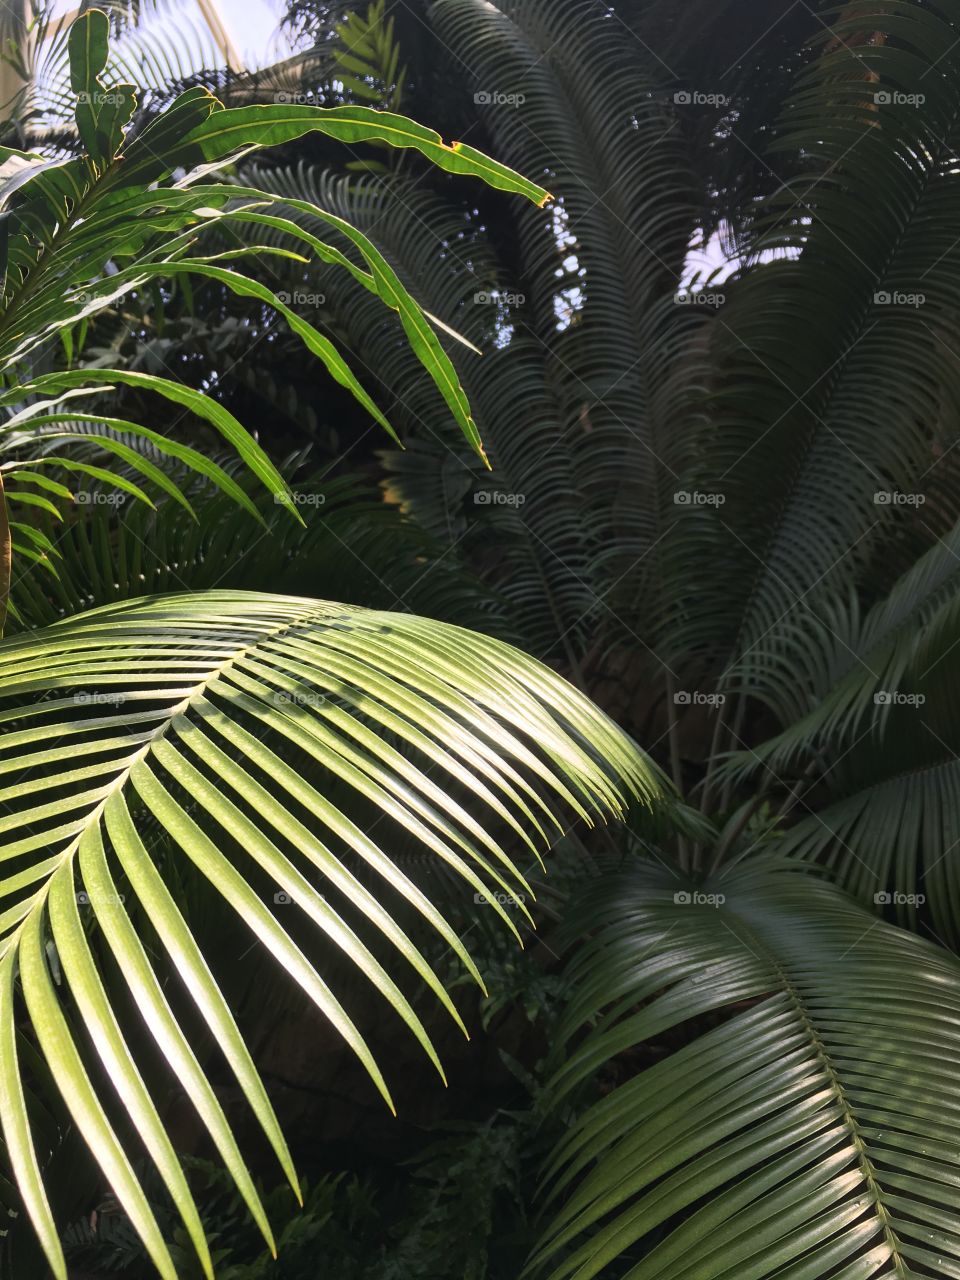 Huge green leaves; Full palms with good contrast and high resolution for depth and creative use. Have fun with this earthy jungle style image. 